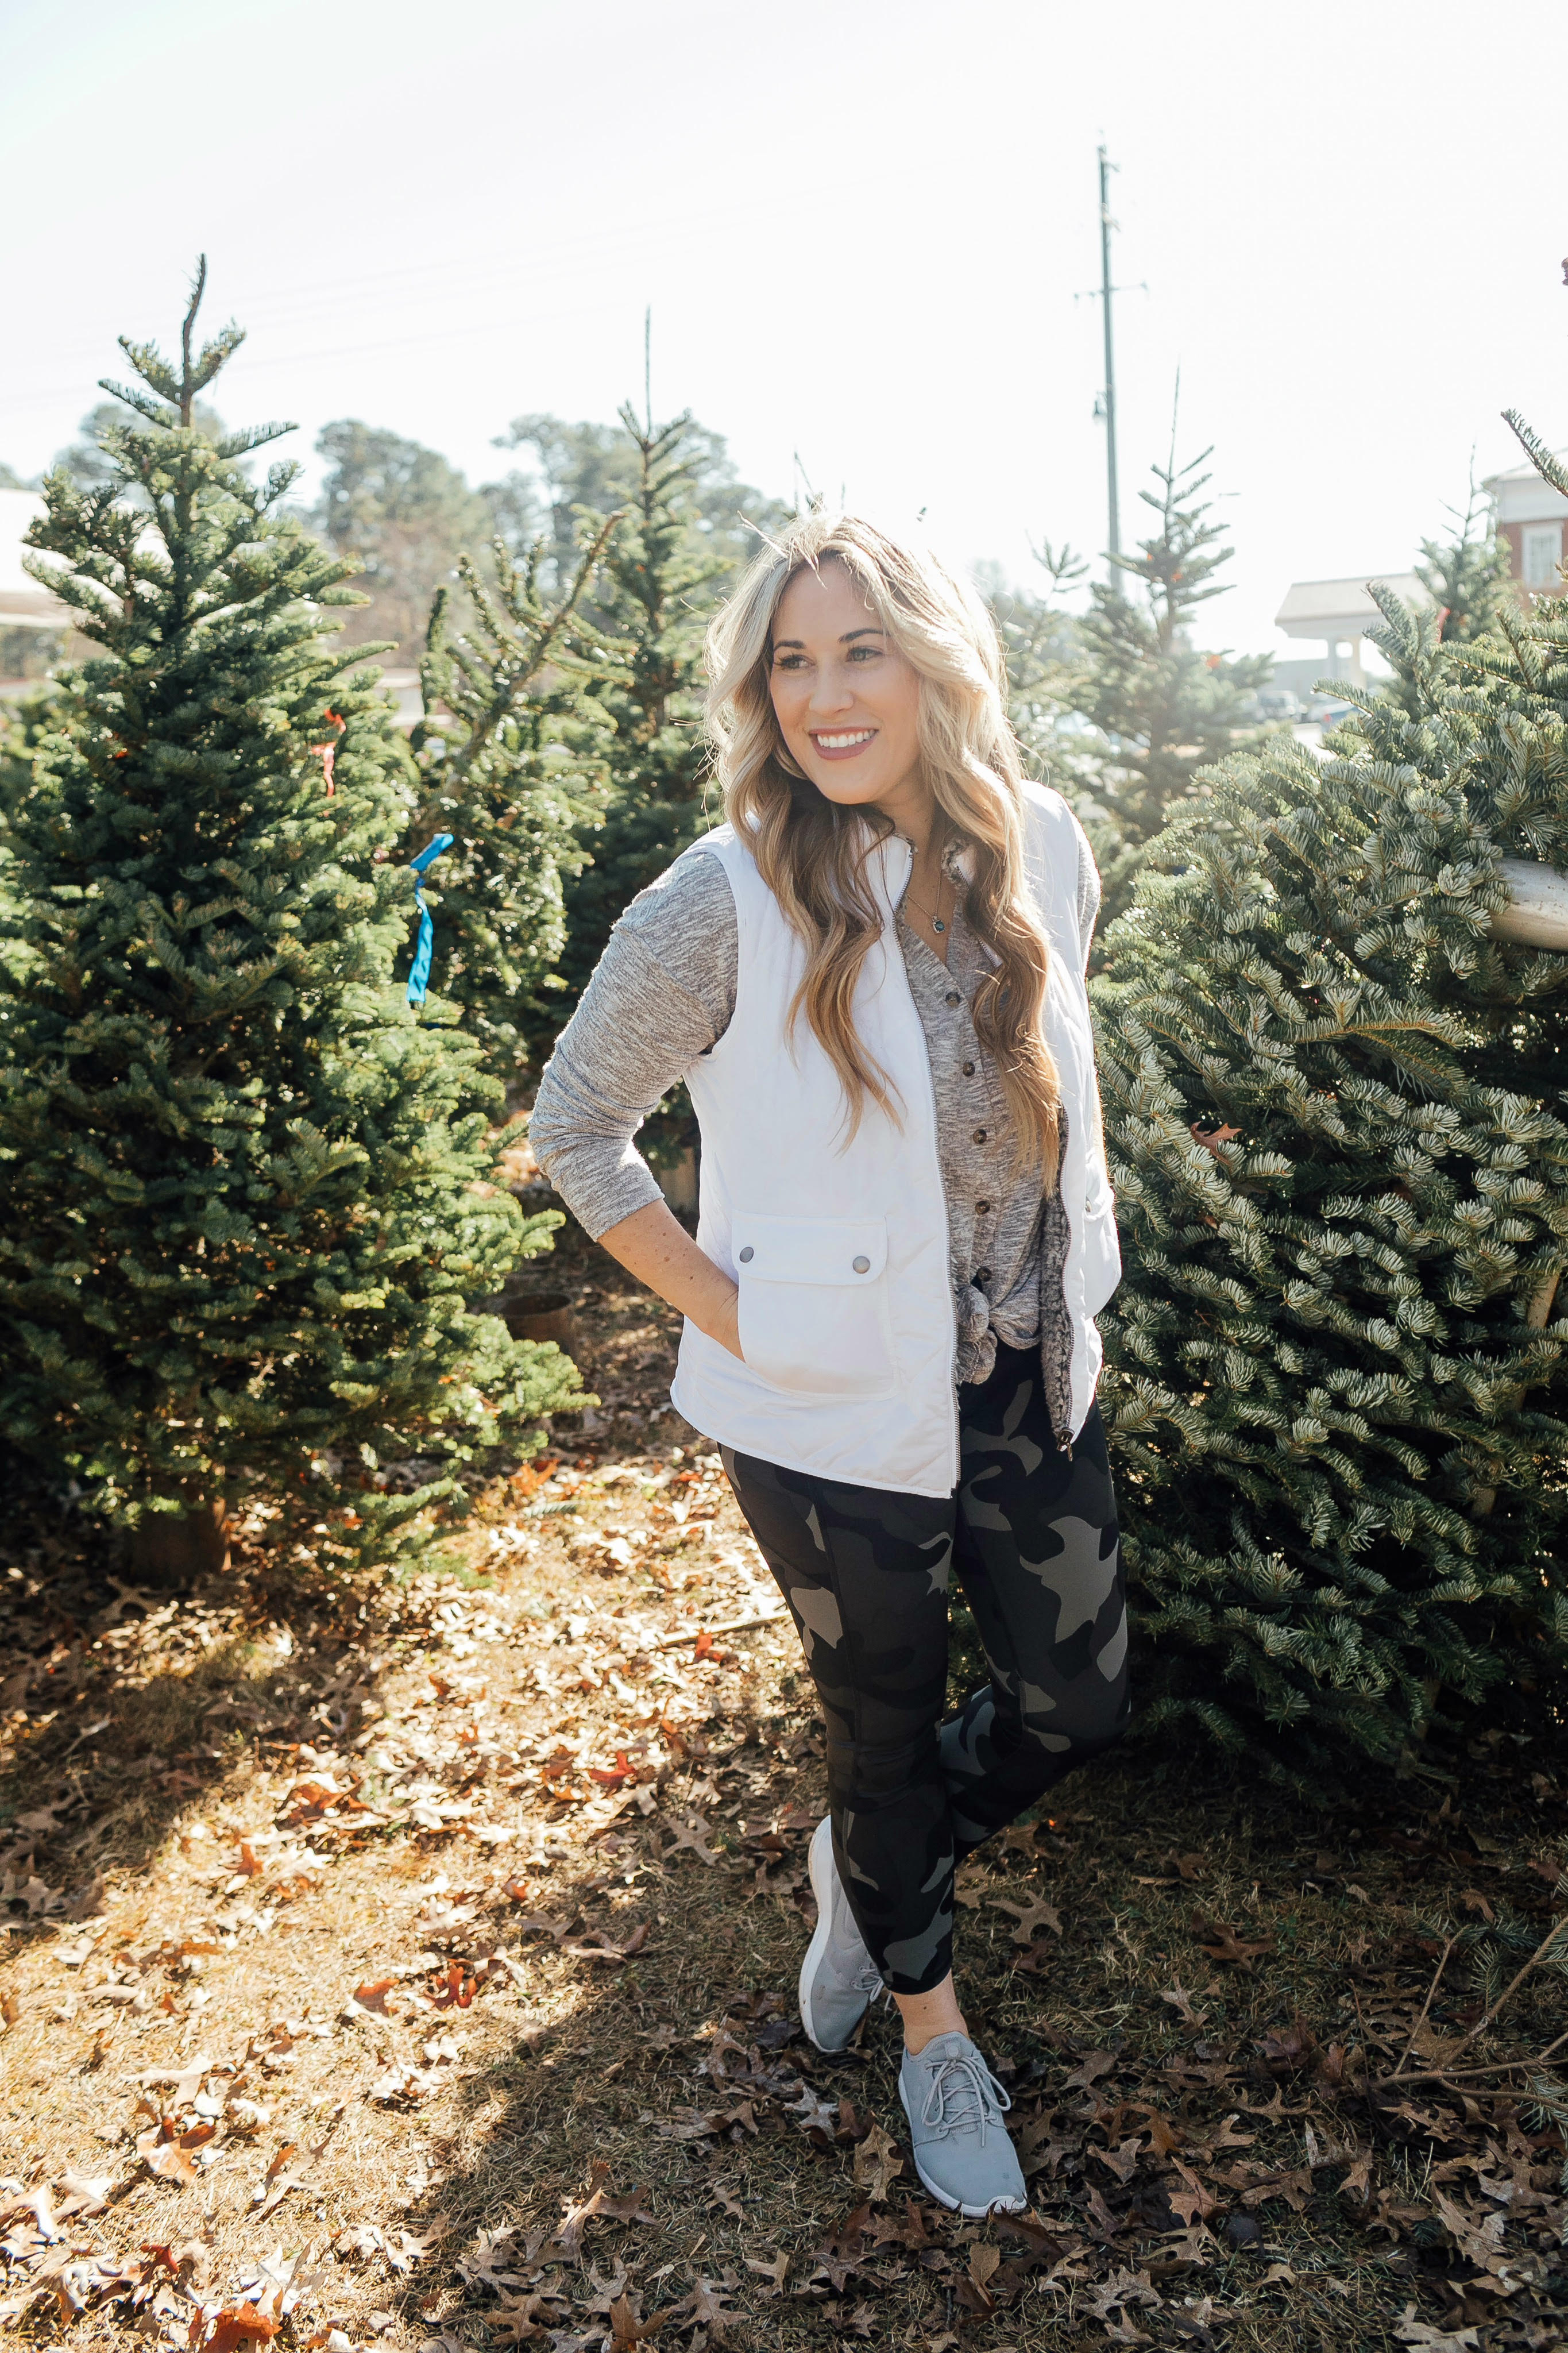 Full Abs Workout featured by top US fitness blog, Walking in Memphis in High Heels, as part of their Holiday Honey Hustle Challenge: image of a woman working out at a Christmas tree farm